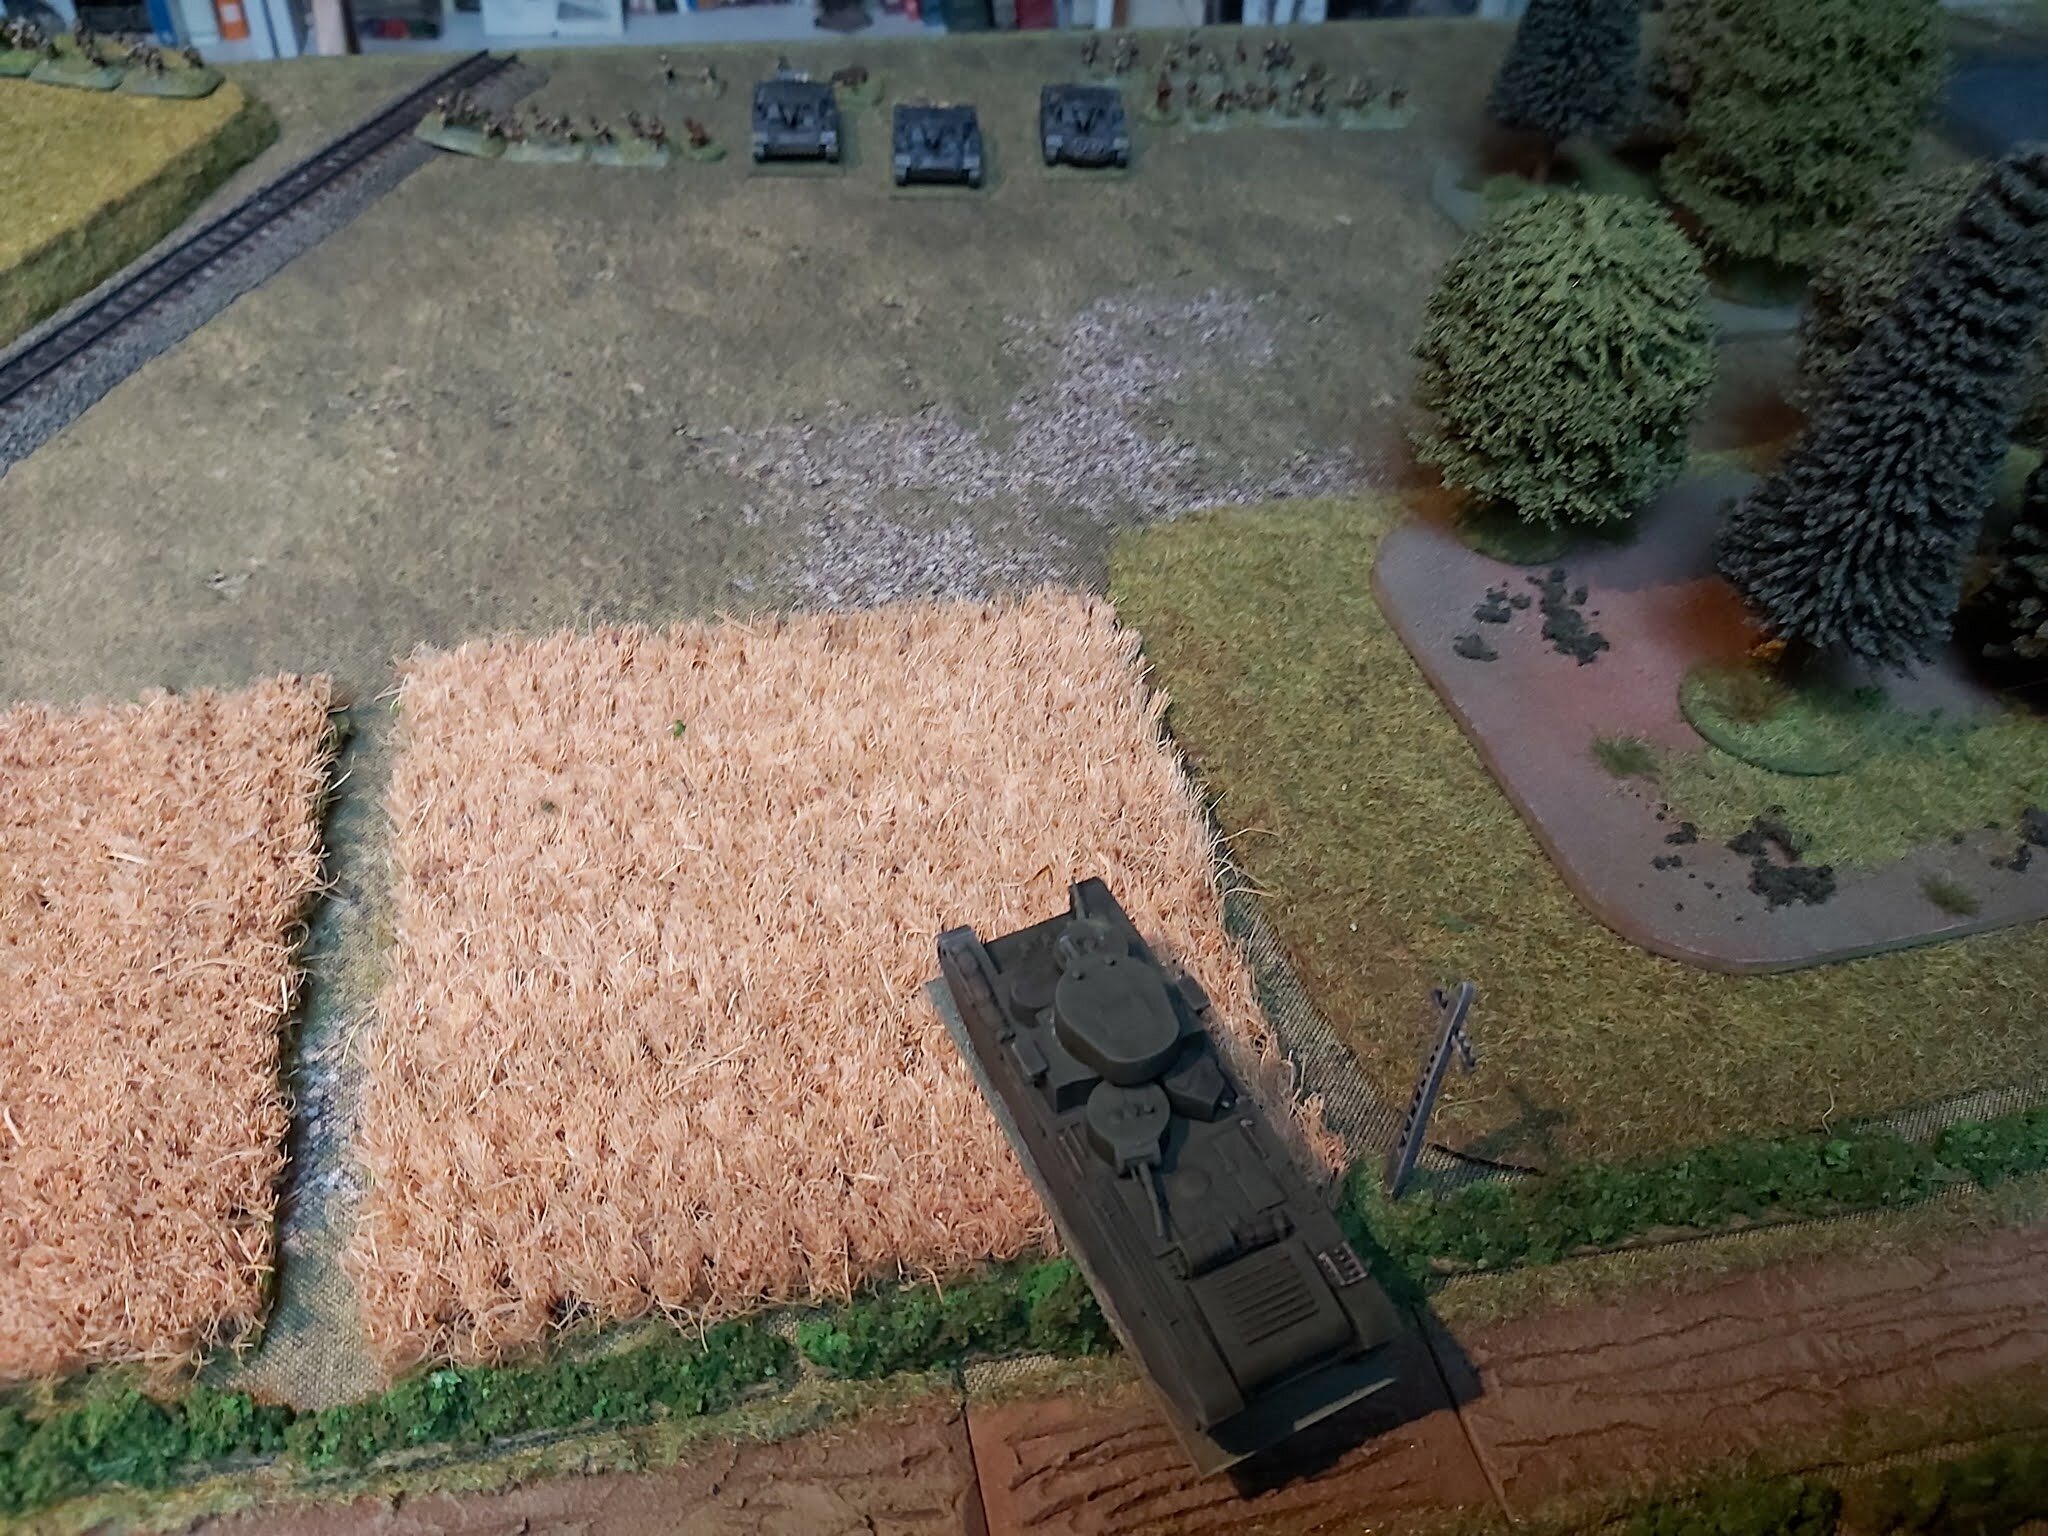 Smashing through the hedge and into the fields one of the T-35s opened fire on the StuGs. Although it hit it only caused minor damage.